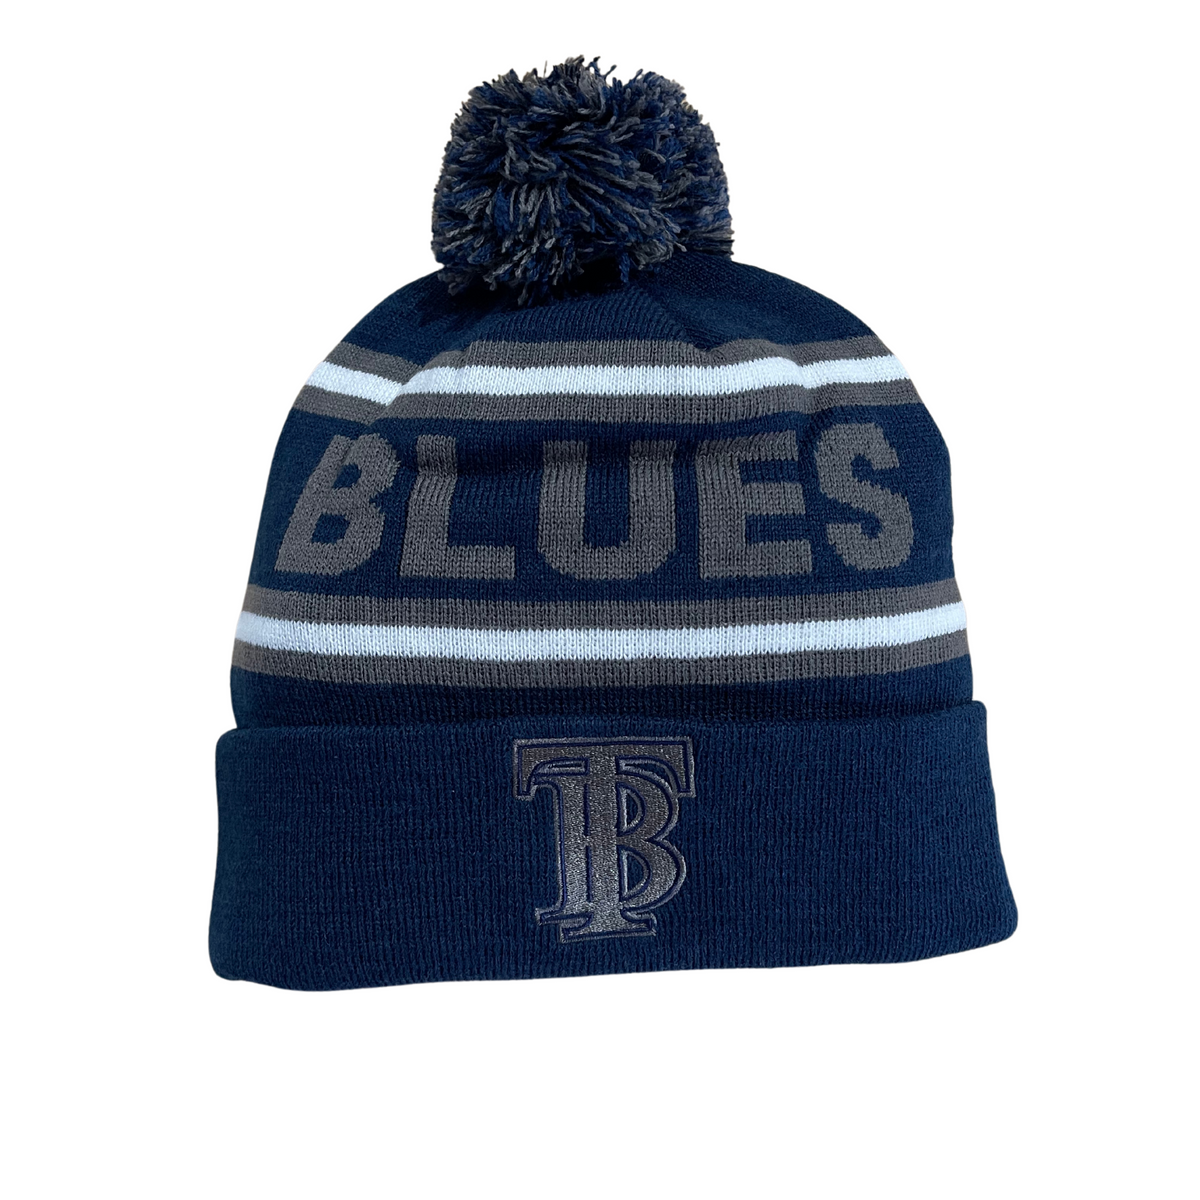 Tumby Bay Blues Woven Banded Knit Beanie Logo Embroidered Navy TB Beanie-Collins Clothing Co